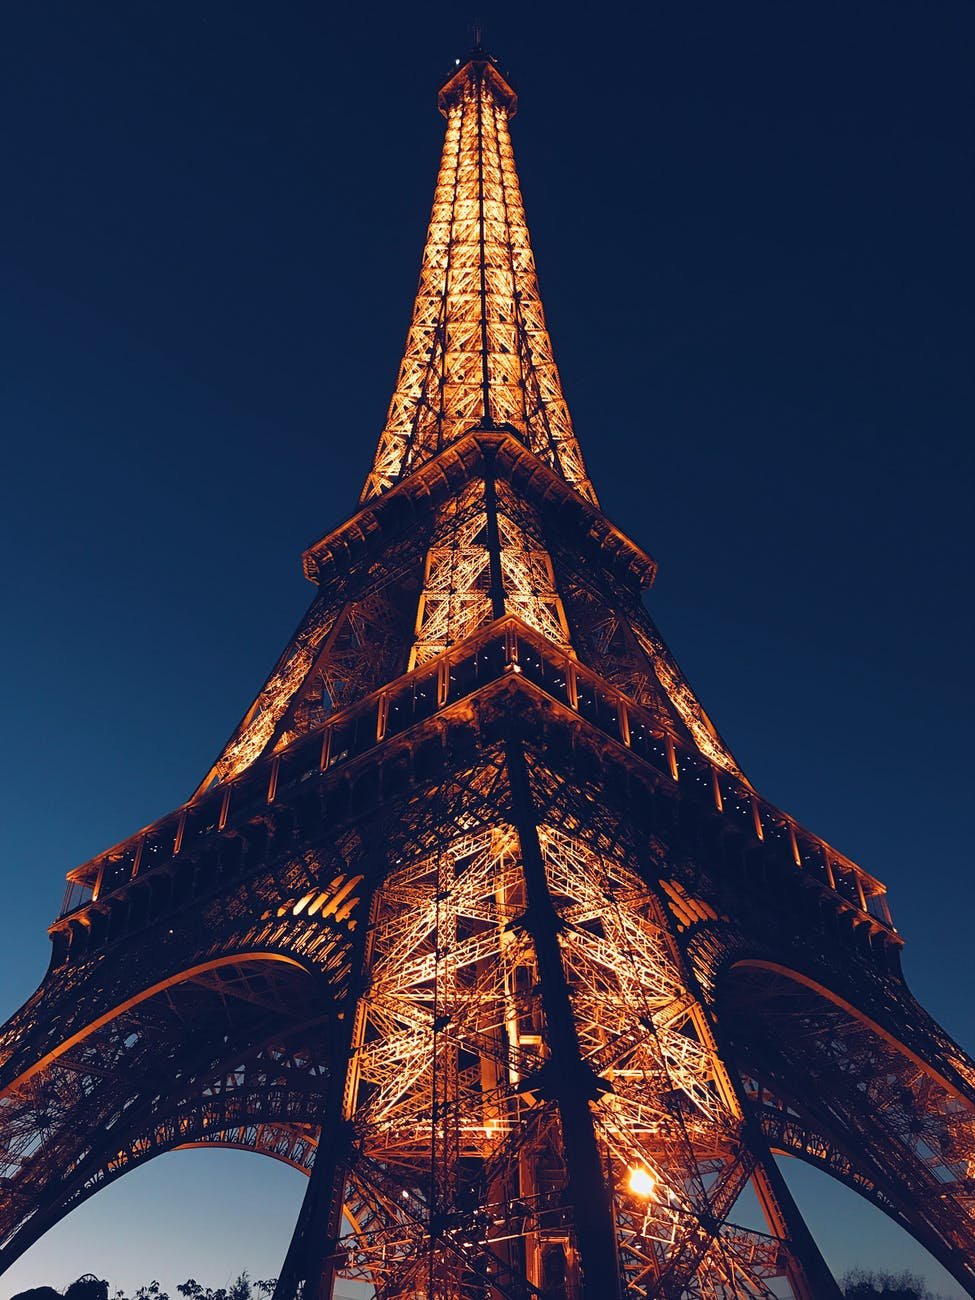 low angle photo of eiffel tower,eiffel tower facts And history